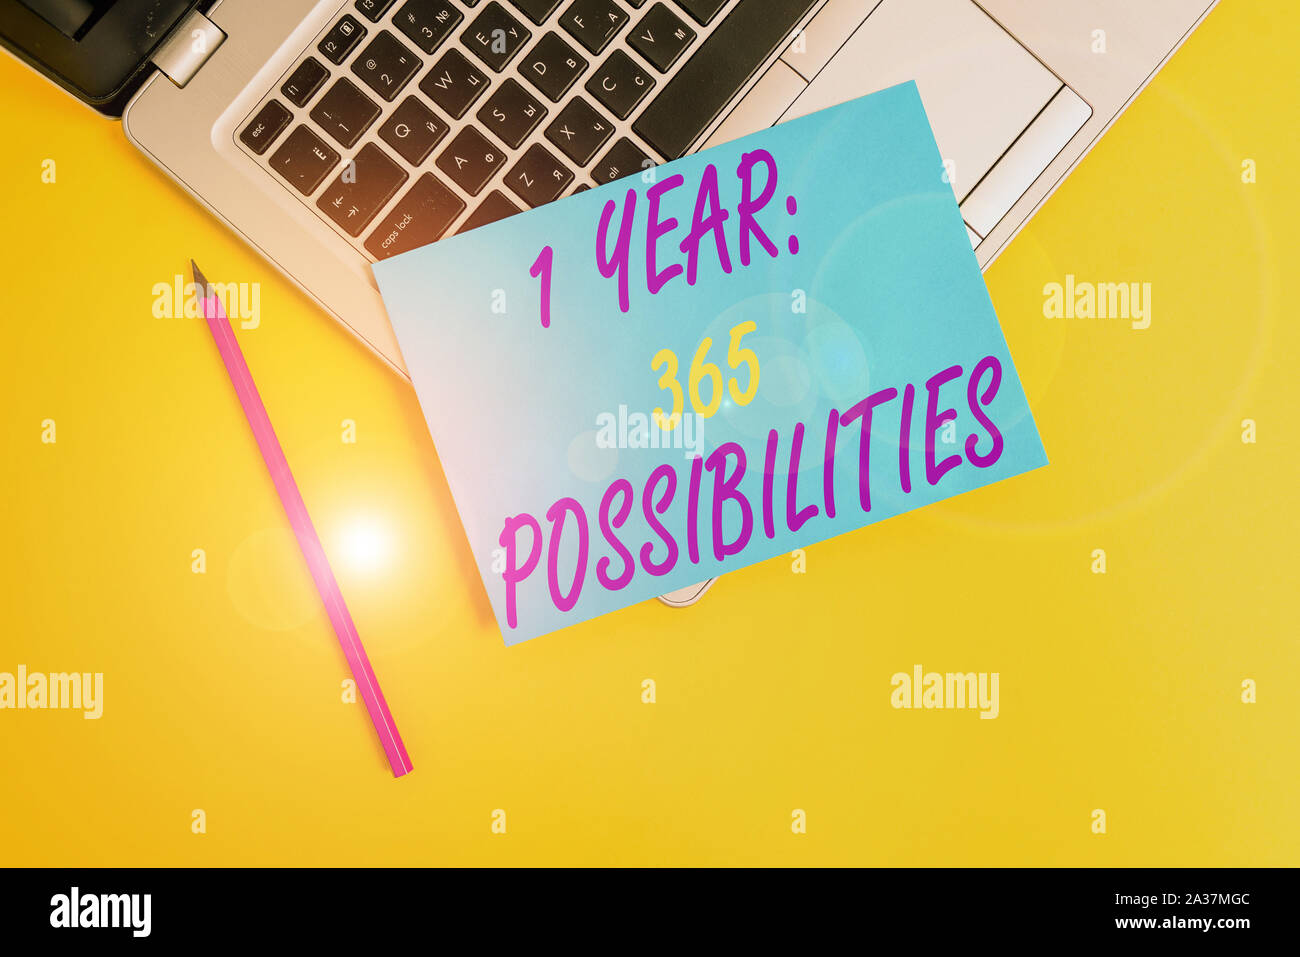 Conceptual Hand Writing Showing 1 Year 365 Possibilities Concept Meaning Beginning Of A New Day Lots Of Chances To Start Metallic Laptop Small Paper Stock Photo Alamy